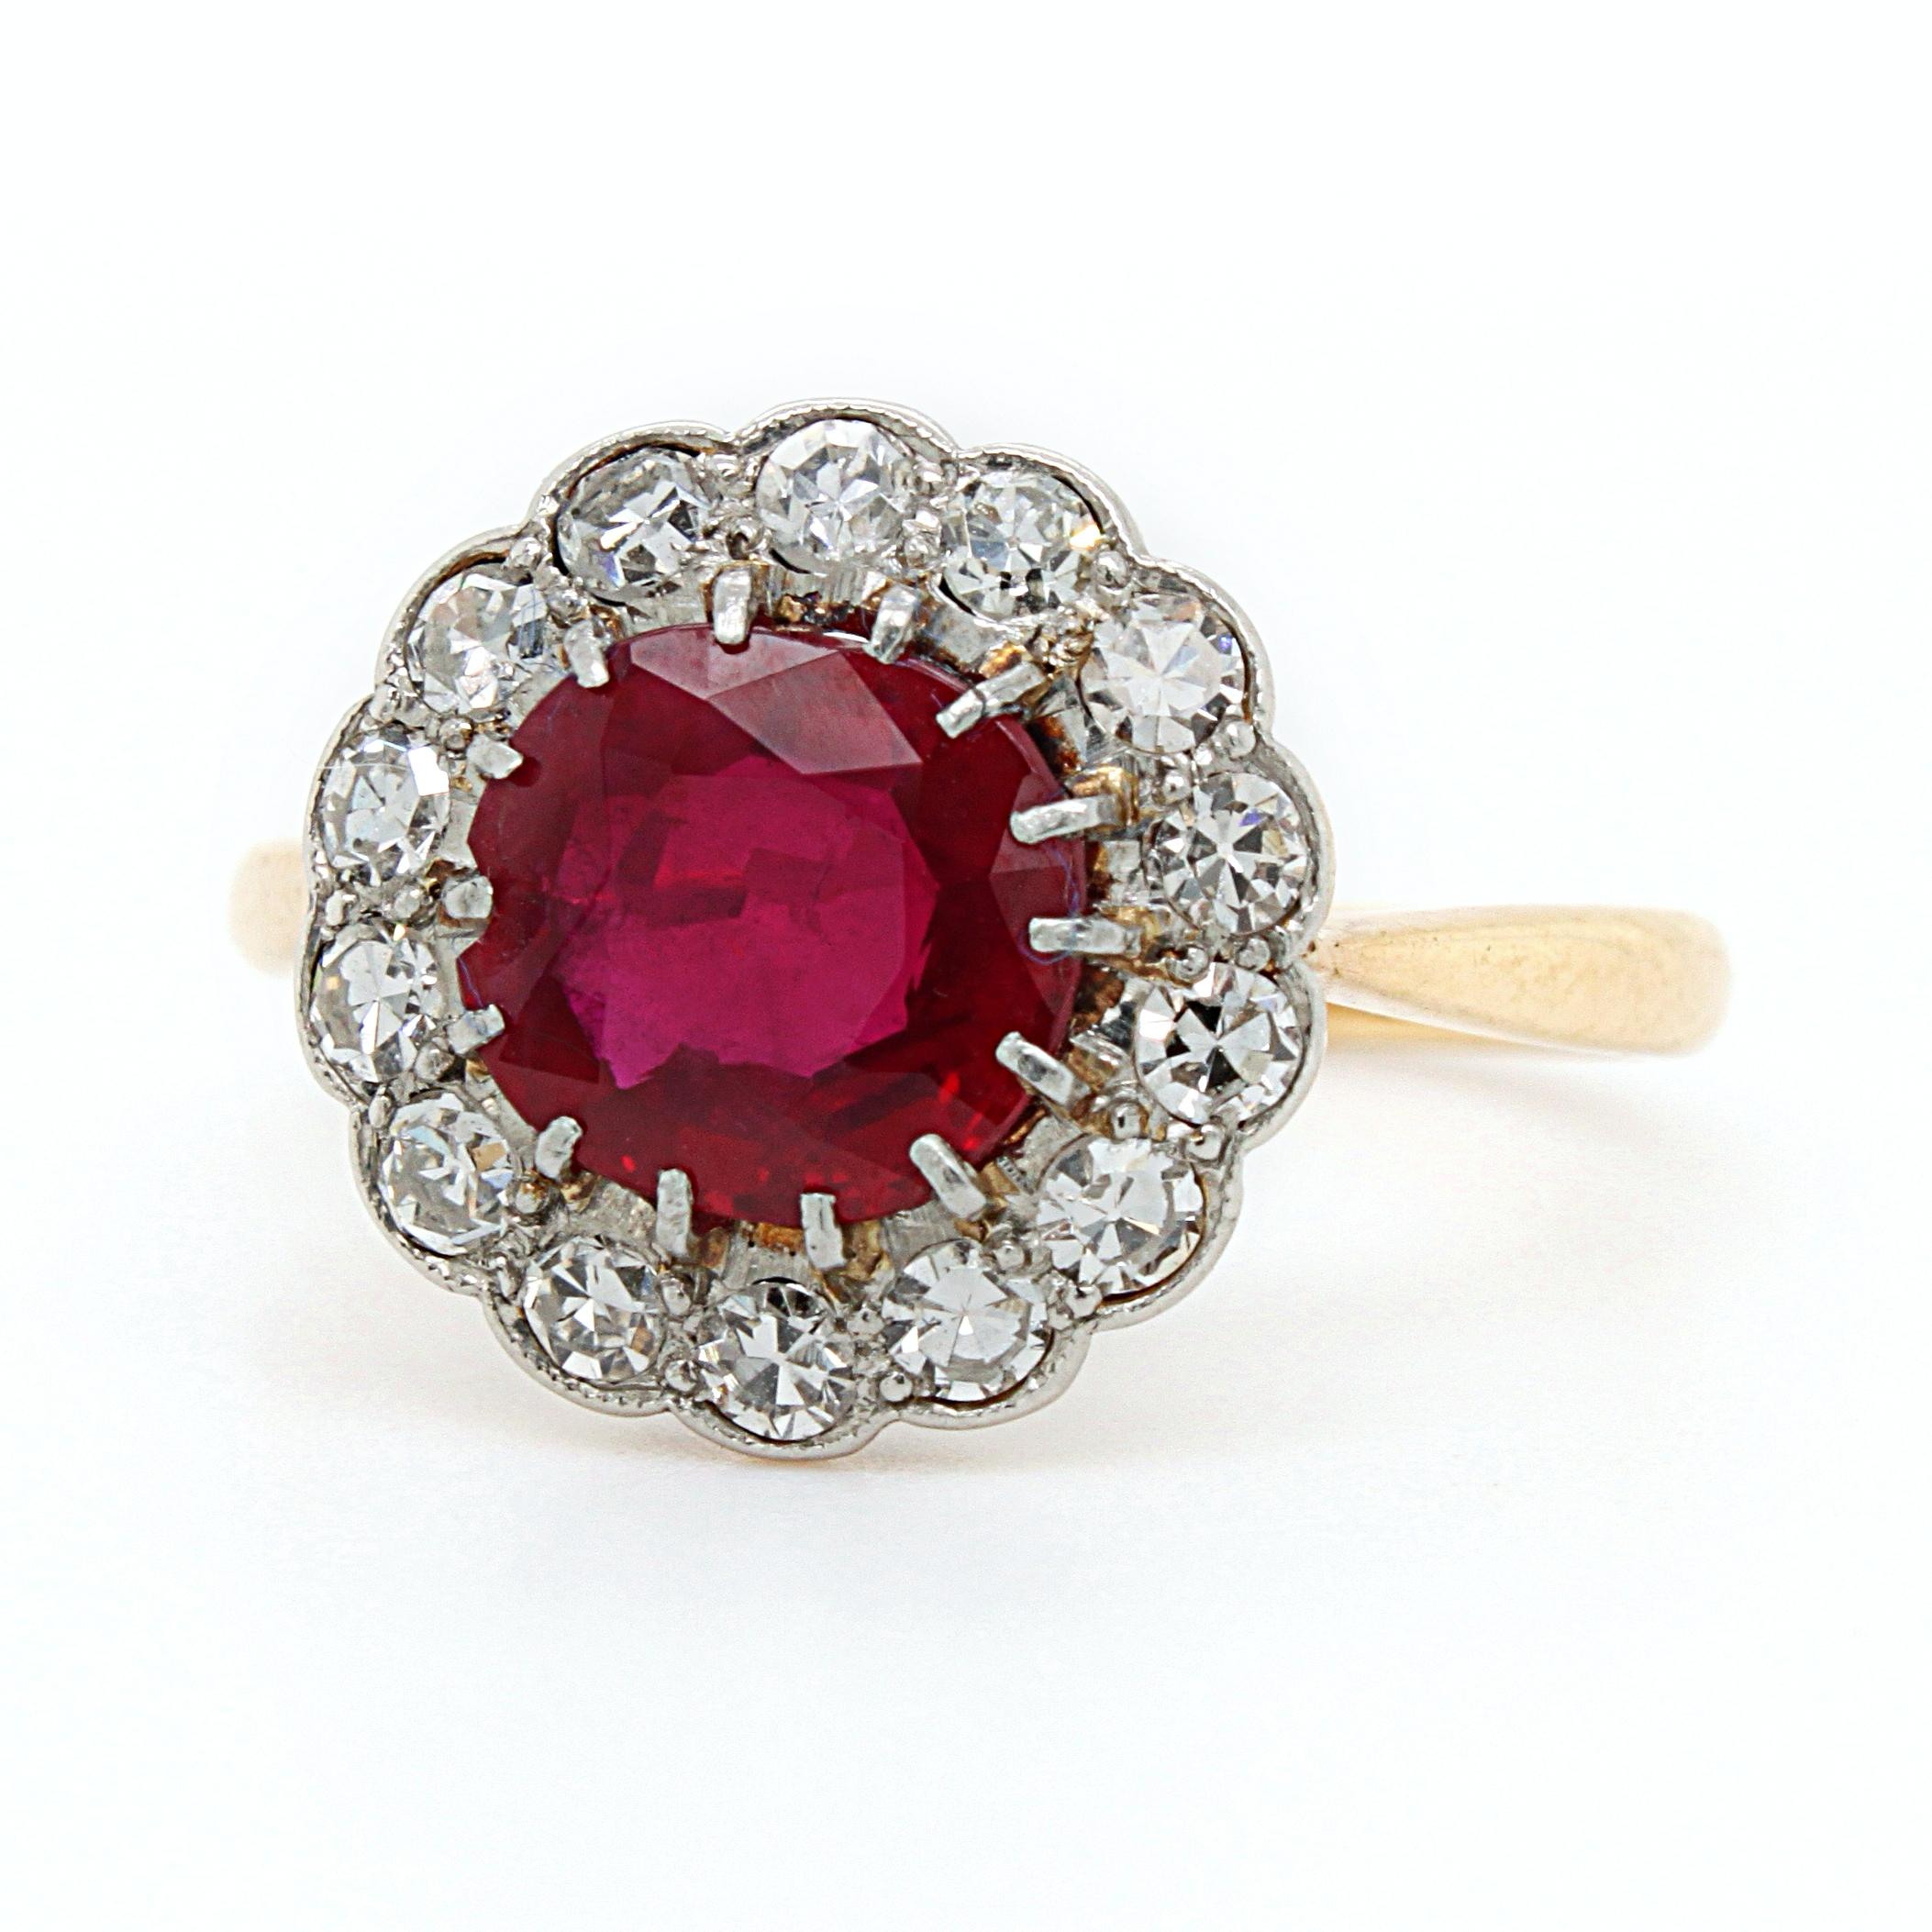 A natural Burmese ruby and single cut diamond cluster Ring, ca. 1900. 

The cushion cut ruby is of exceptional quality. It has a pigeon blood red colour and beautiful crystal. It weighs ca. 1.9 carats, is of Burmese origin and not heated,